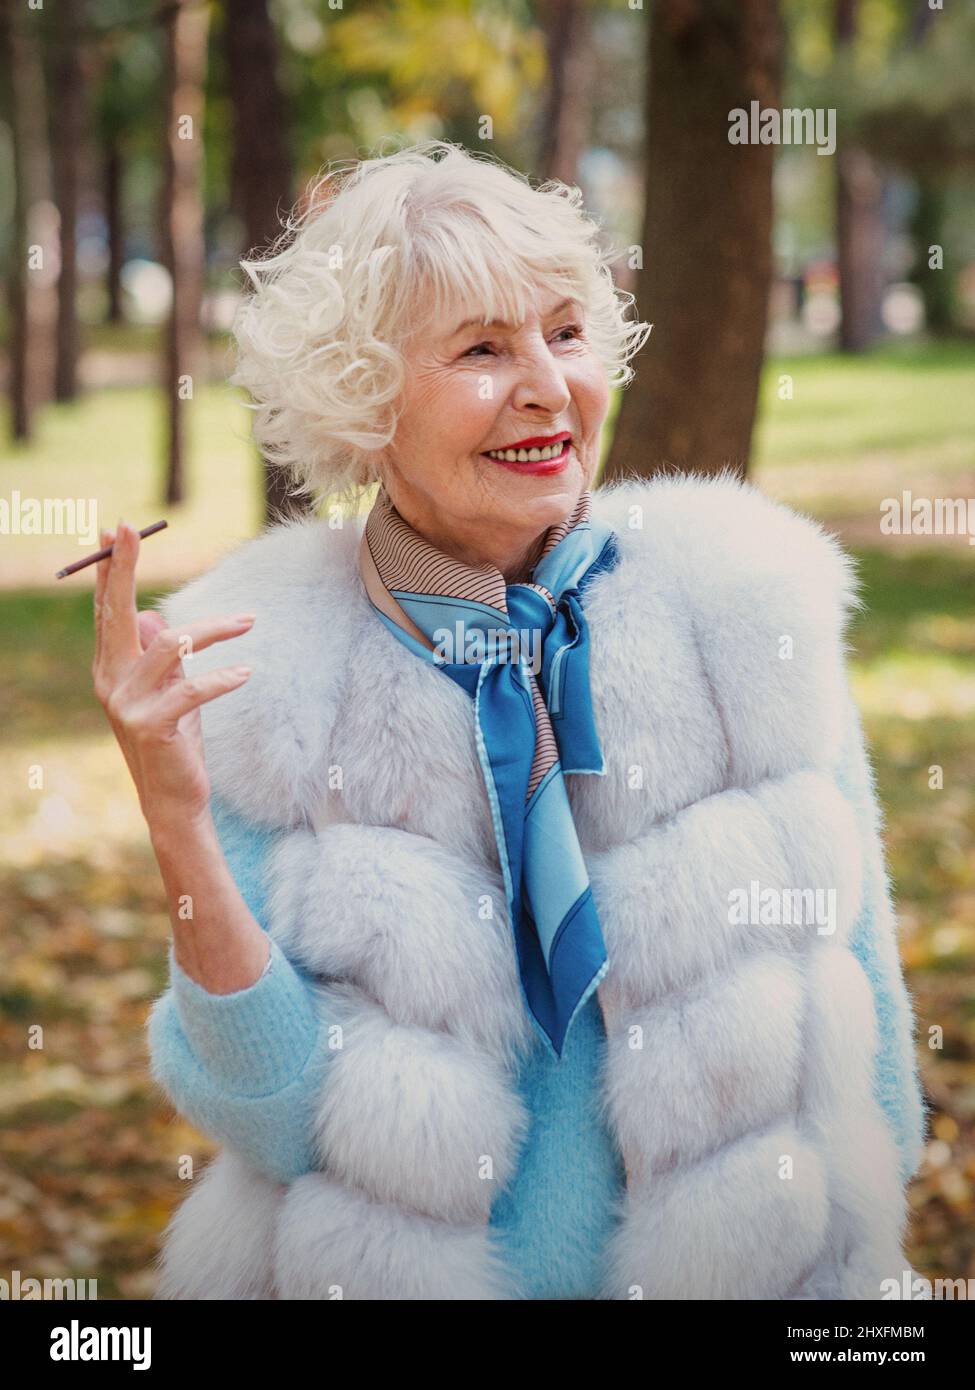 smiling senior elegant stylish fashionable woman with grey hair in fur coat outdoor smoking cigarette. Unhealthy lifestyle, age, positive vibes Stock Photo